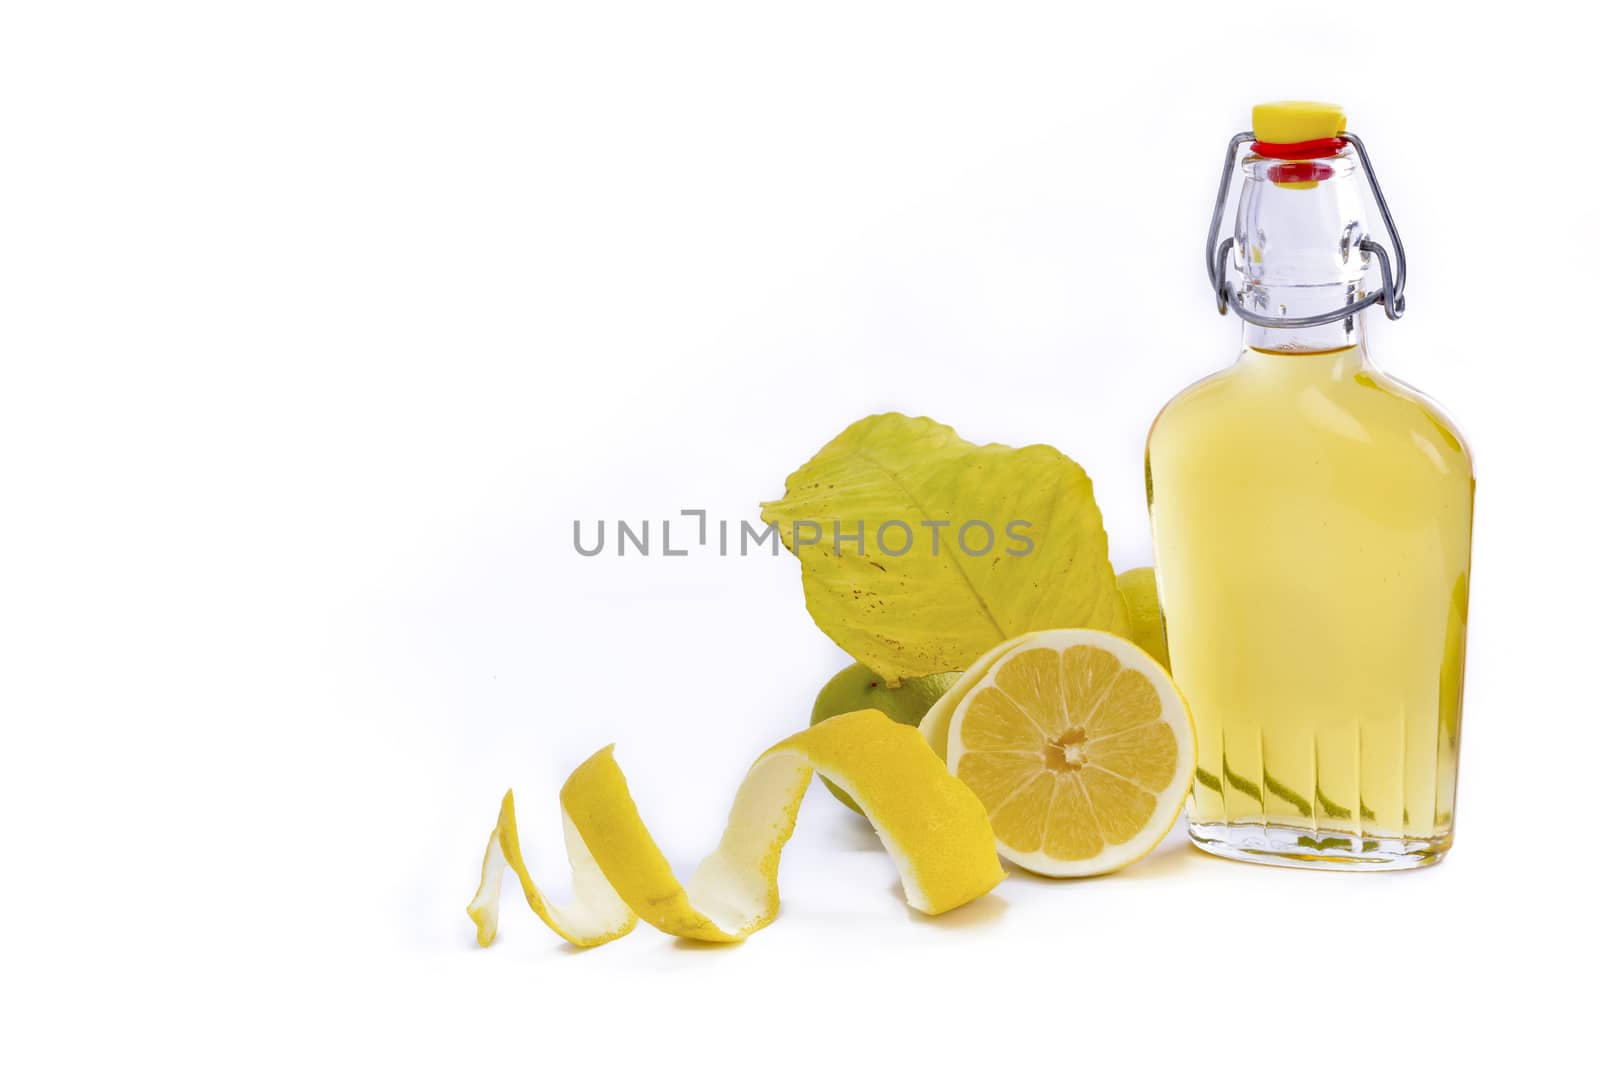 Open glass decanter bottle and shot glass filled with yellow lemon liquor or limoncello or limoncino on white. Peeled natural organic lemon.